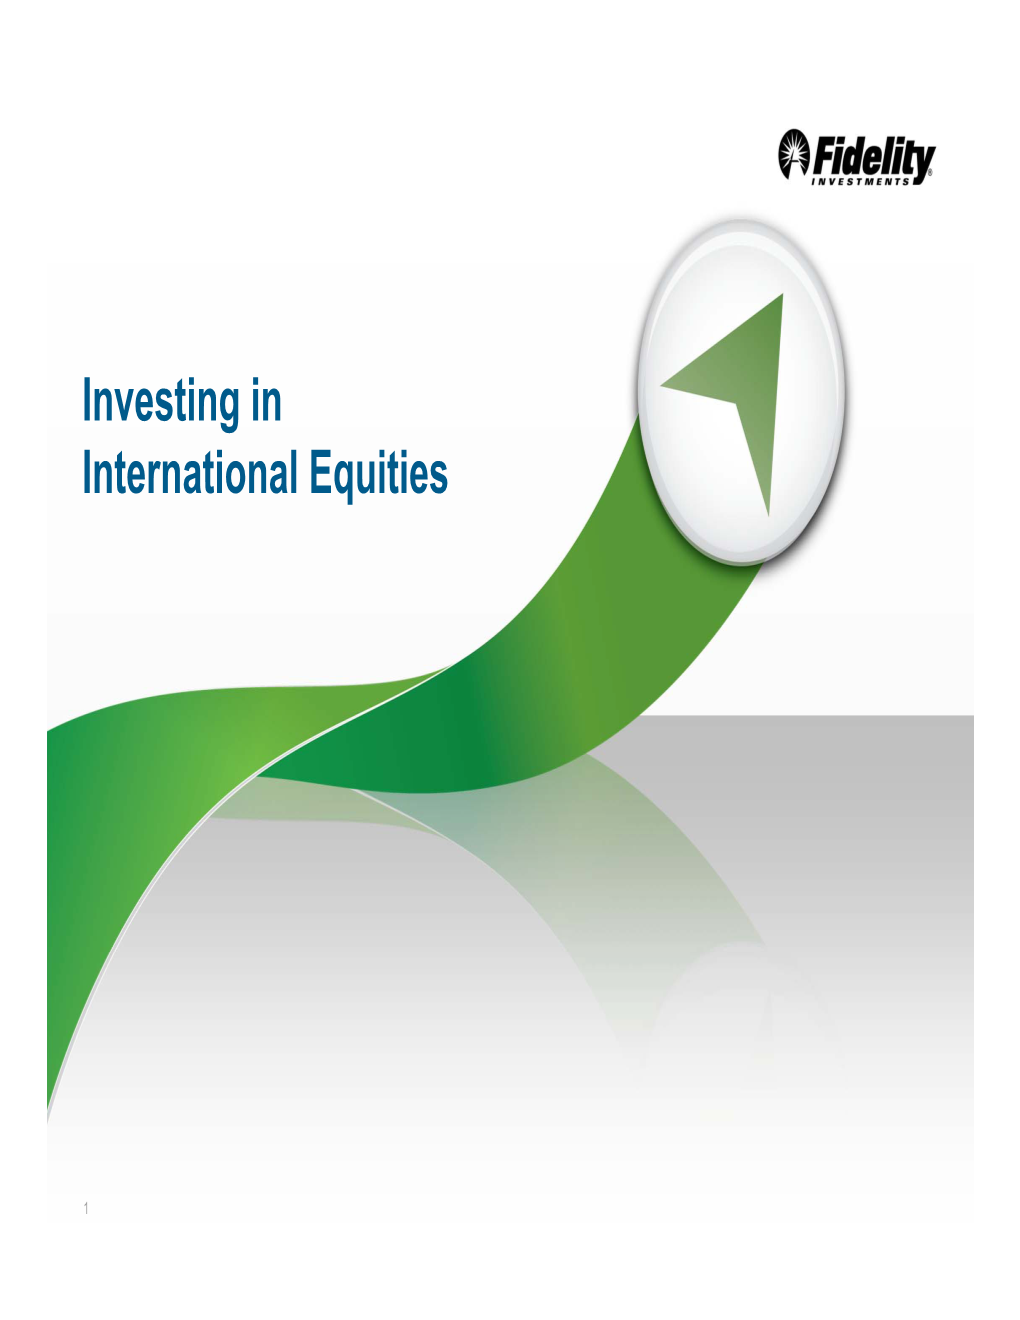 Investing in International Equities